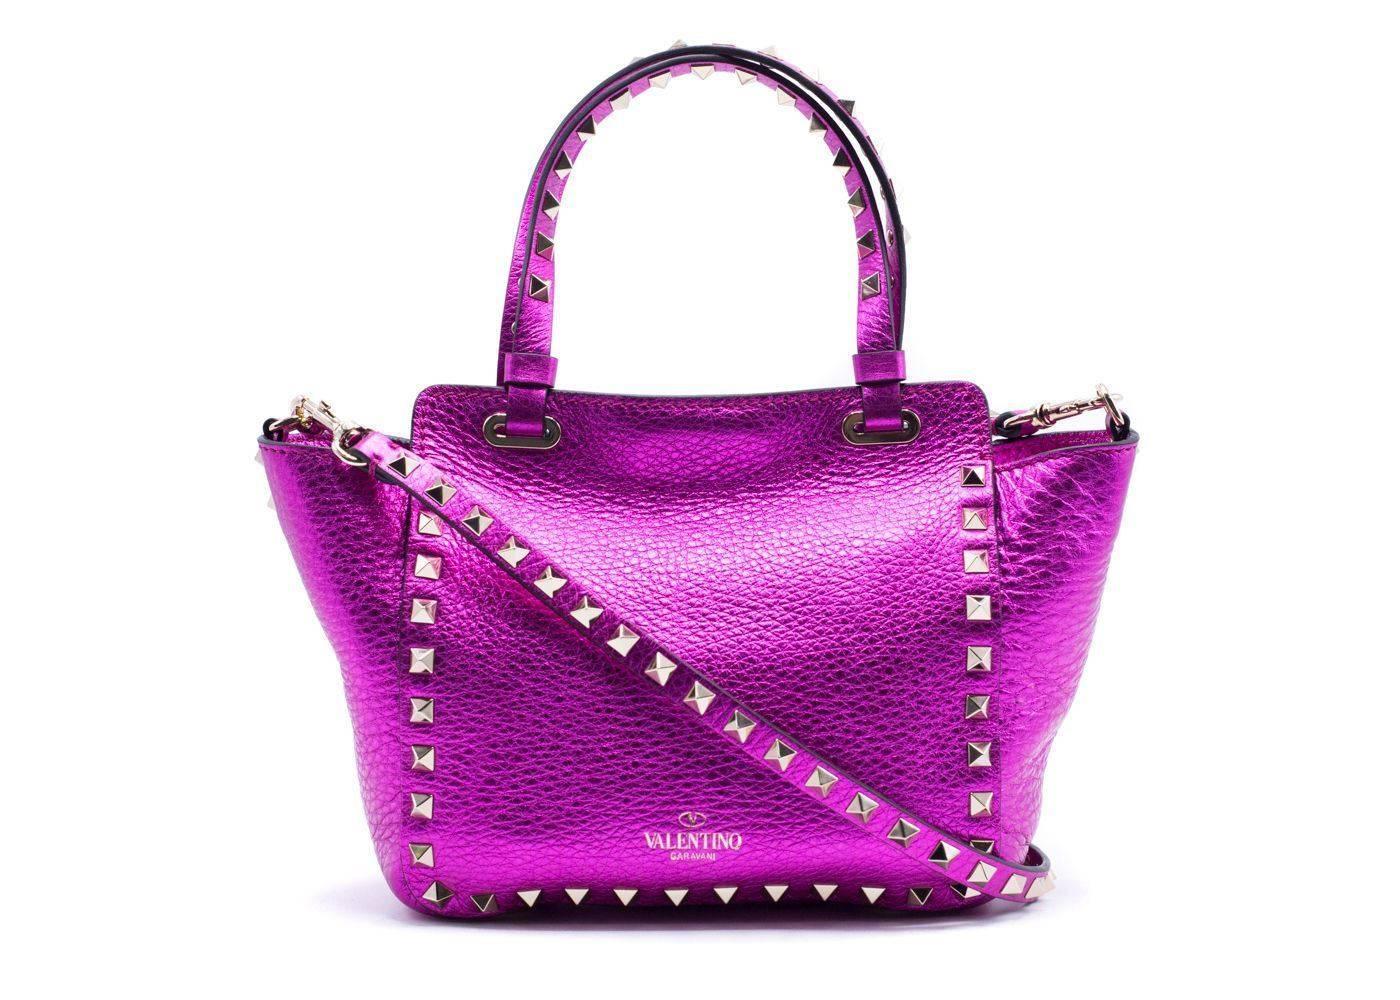 Gorgeous hot pink Valentino tote in their signature rockstud silhouette. Perfect for this summer season to shine bright in this sunny weather.
Pair it with your go to outfit and everyday essentials for that effortless fashionable look.

Composition: